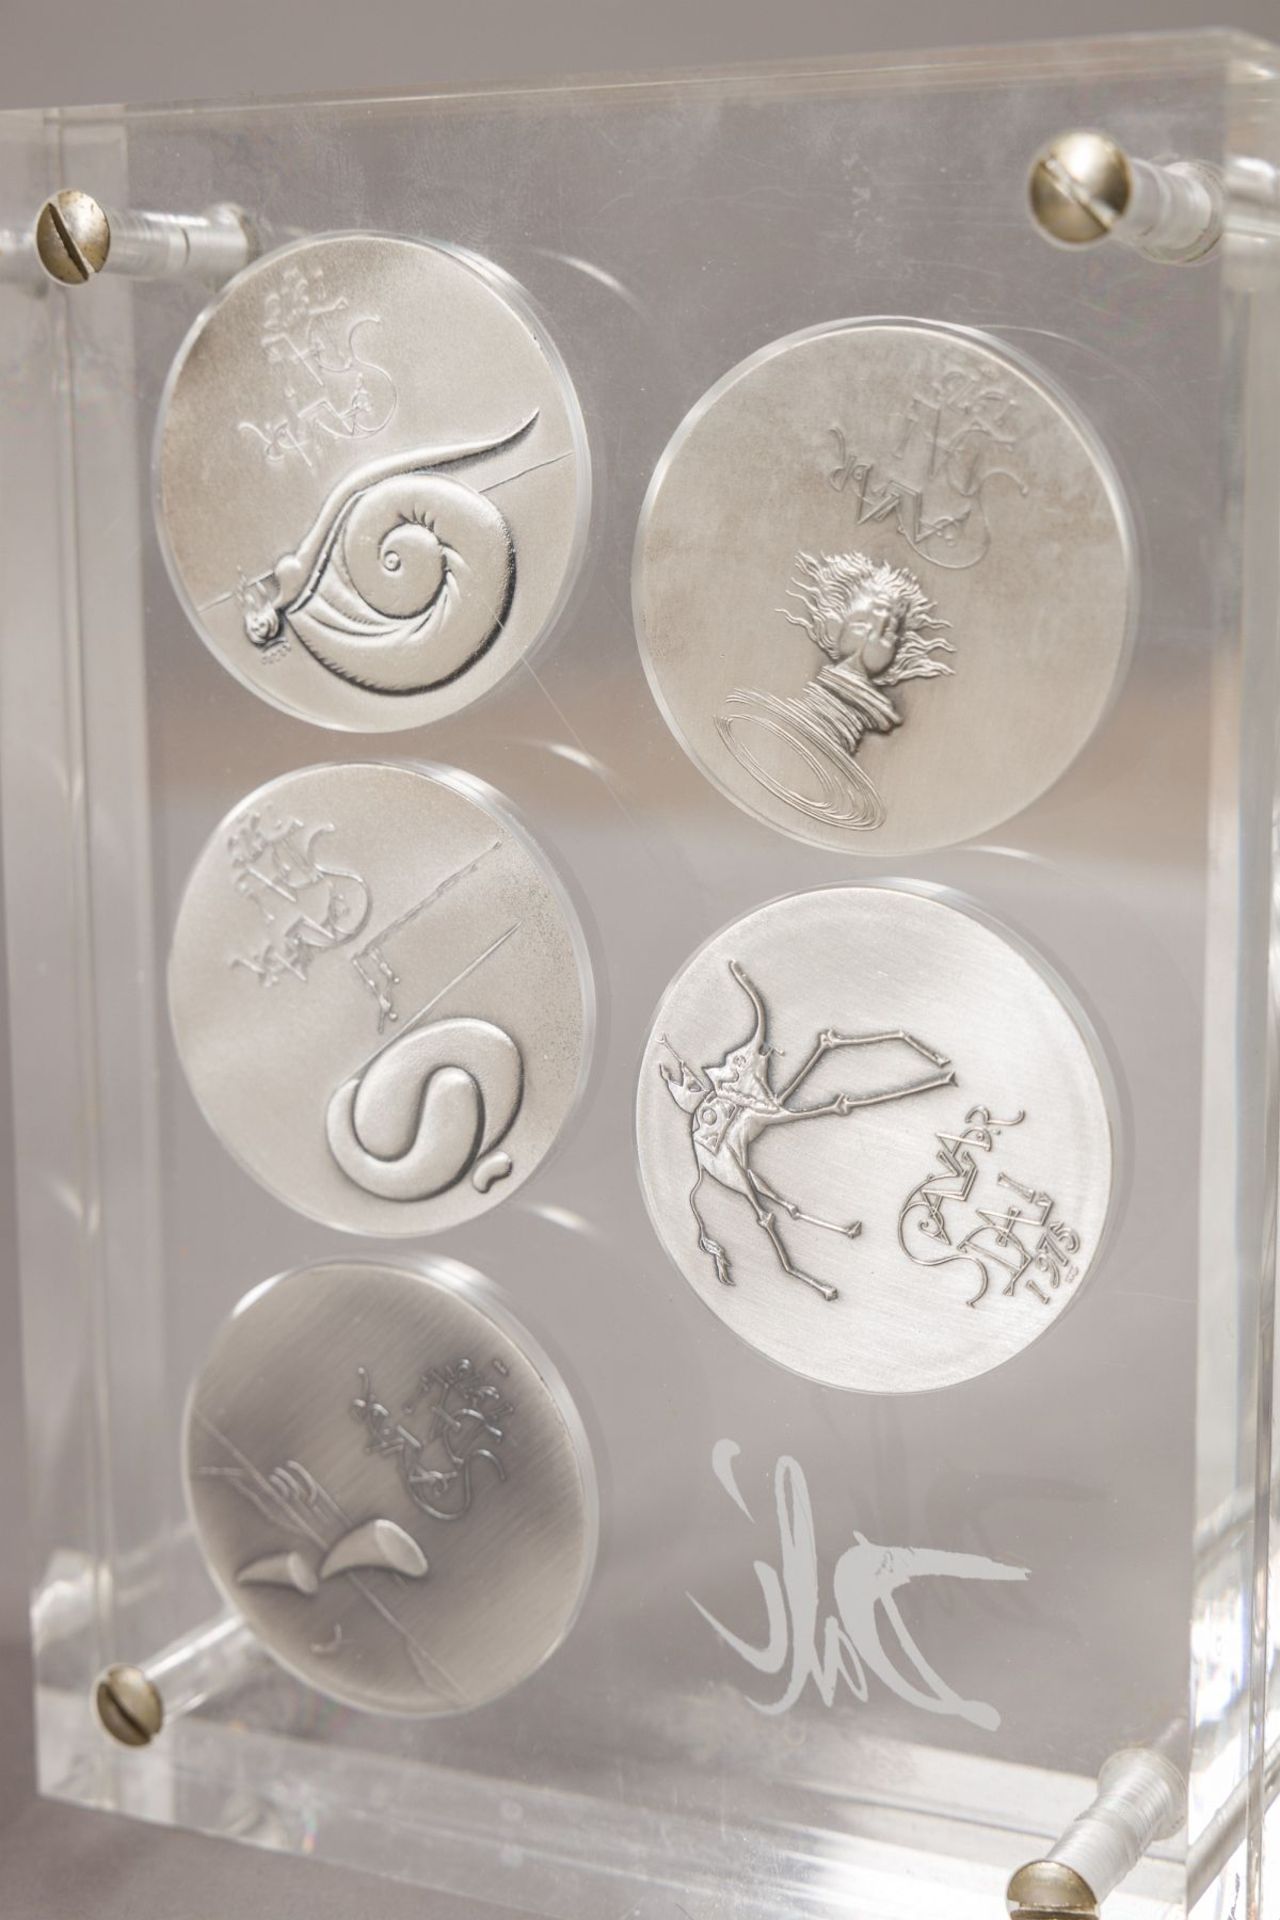 Dalí, Salvador(1904 - 1989)Ten Commandments, 1975each 5 silvermedals in acrylic glasseach - Image 11 of 14